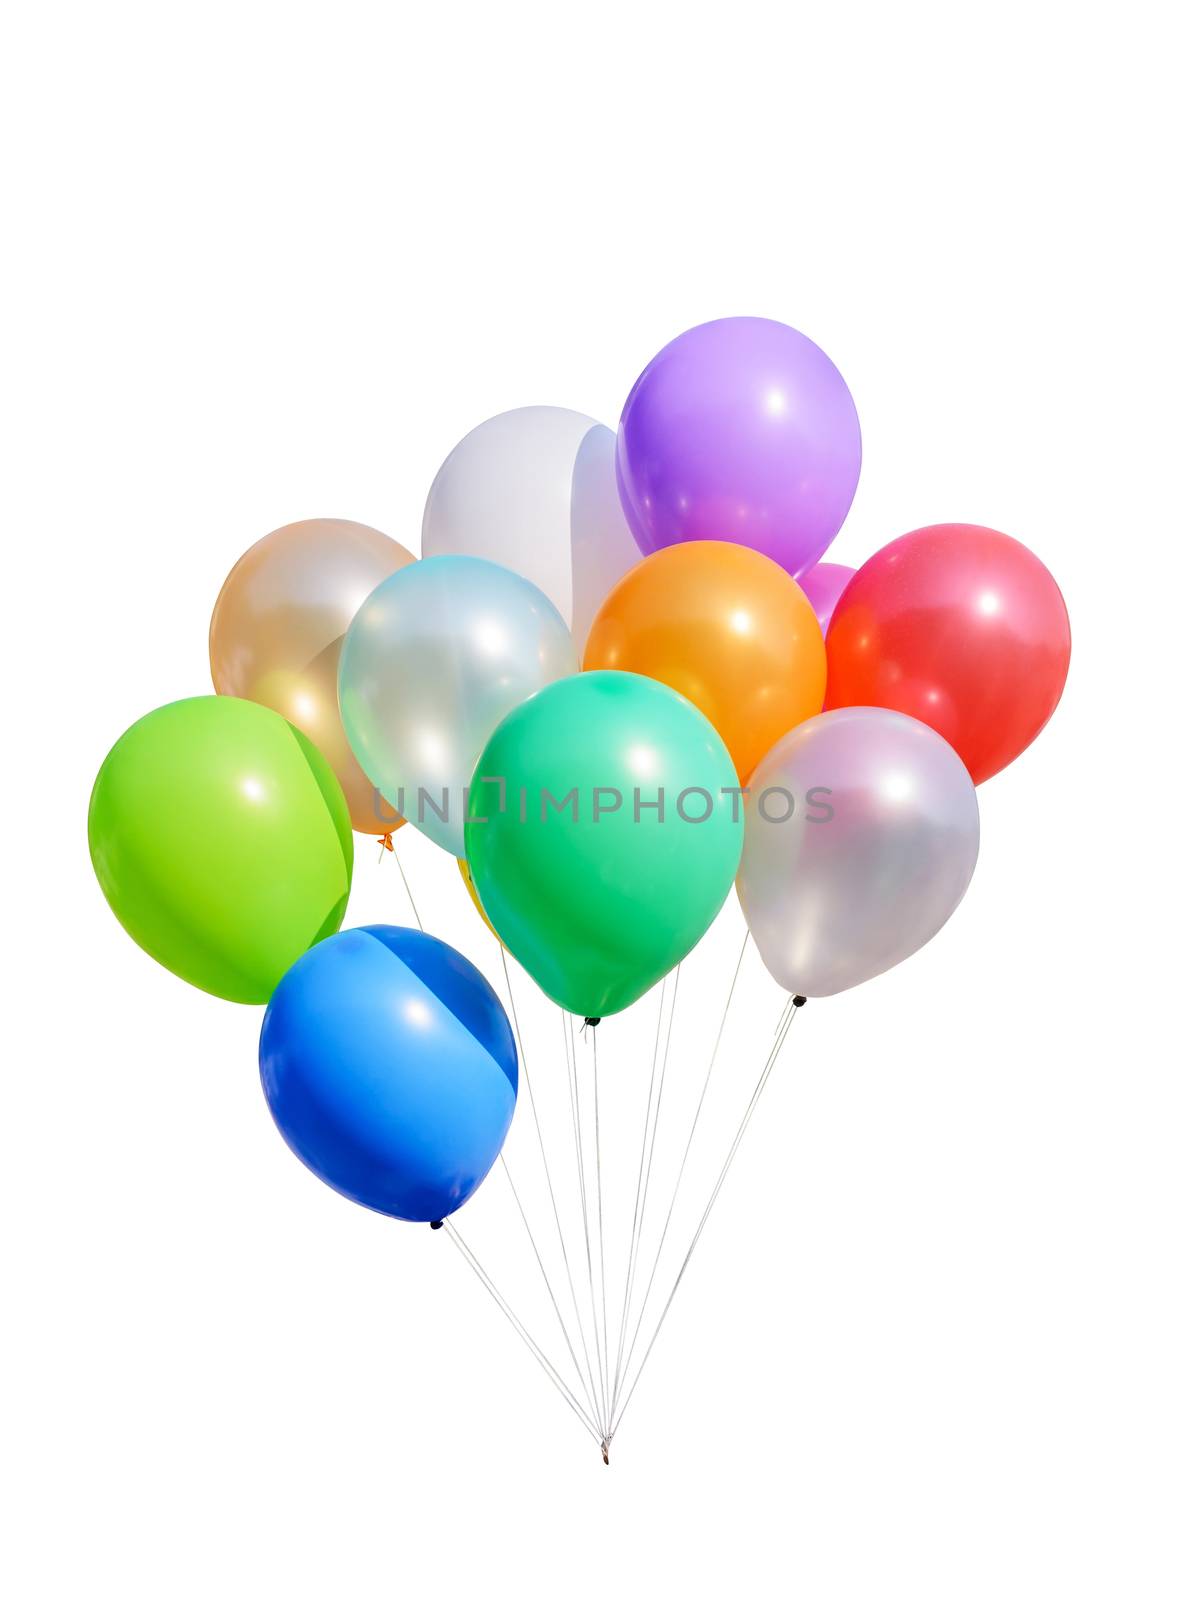 Colorful balloons isolated on white background with clipping path